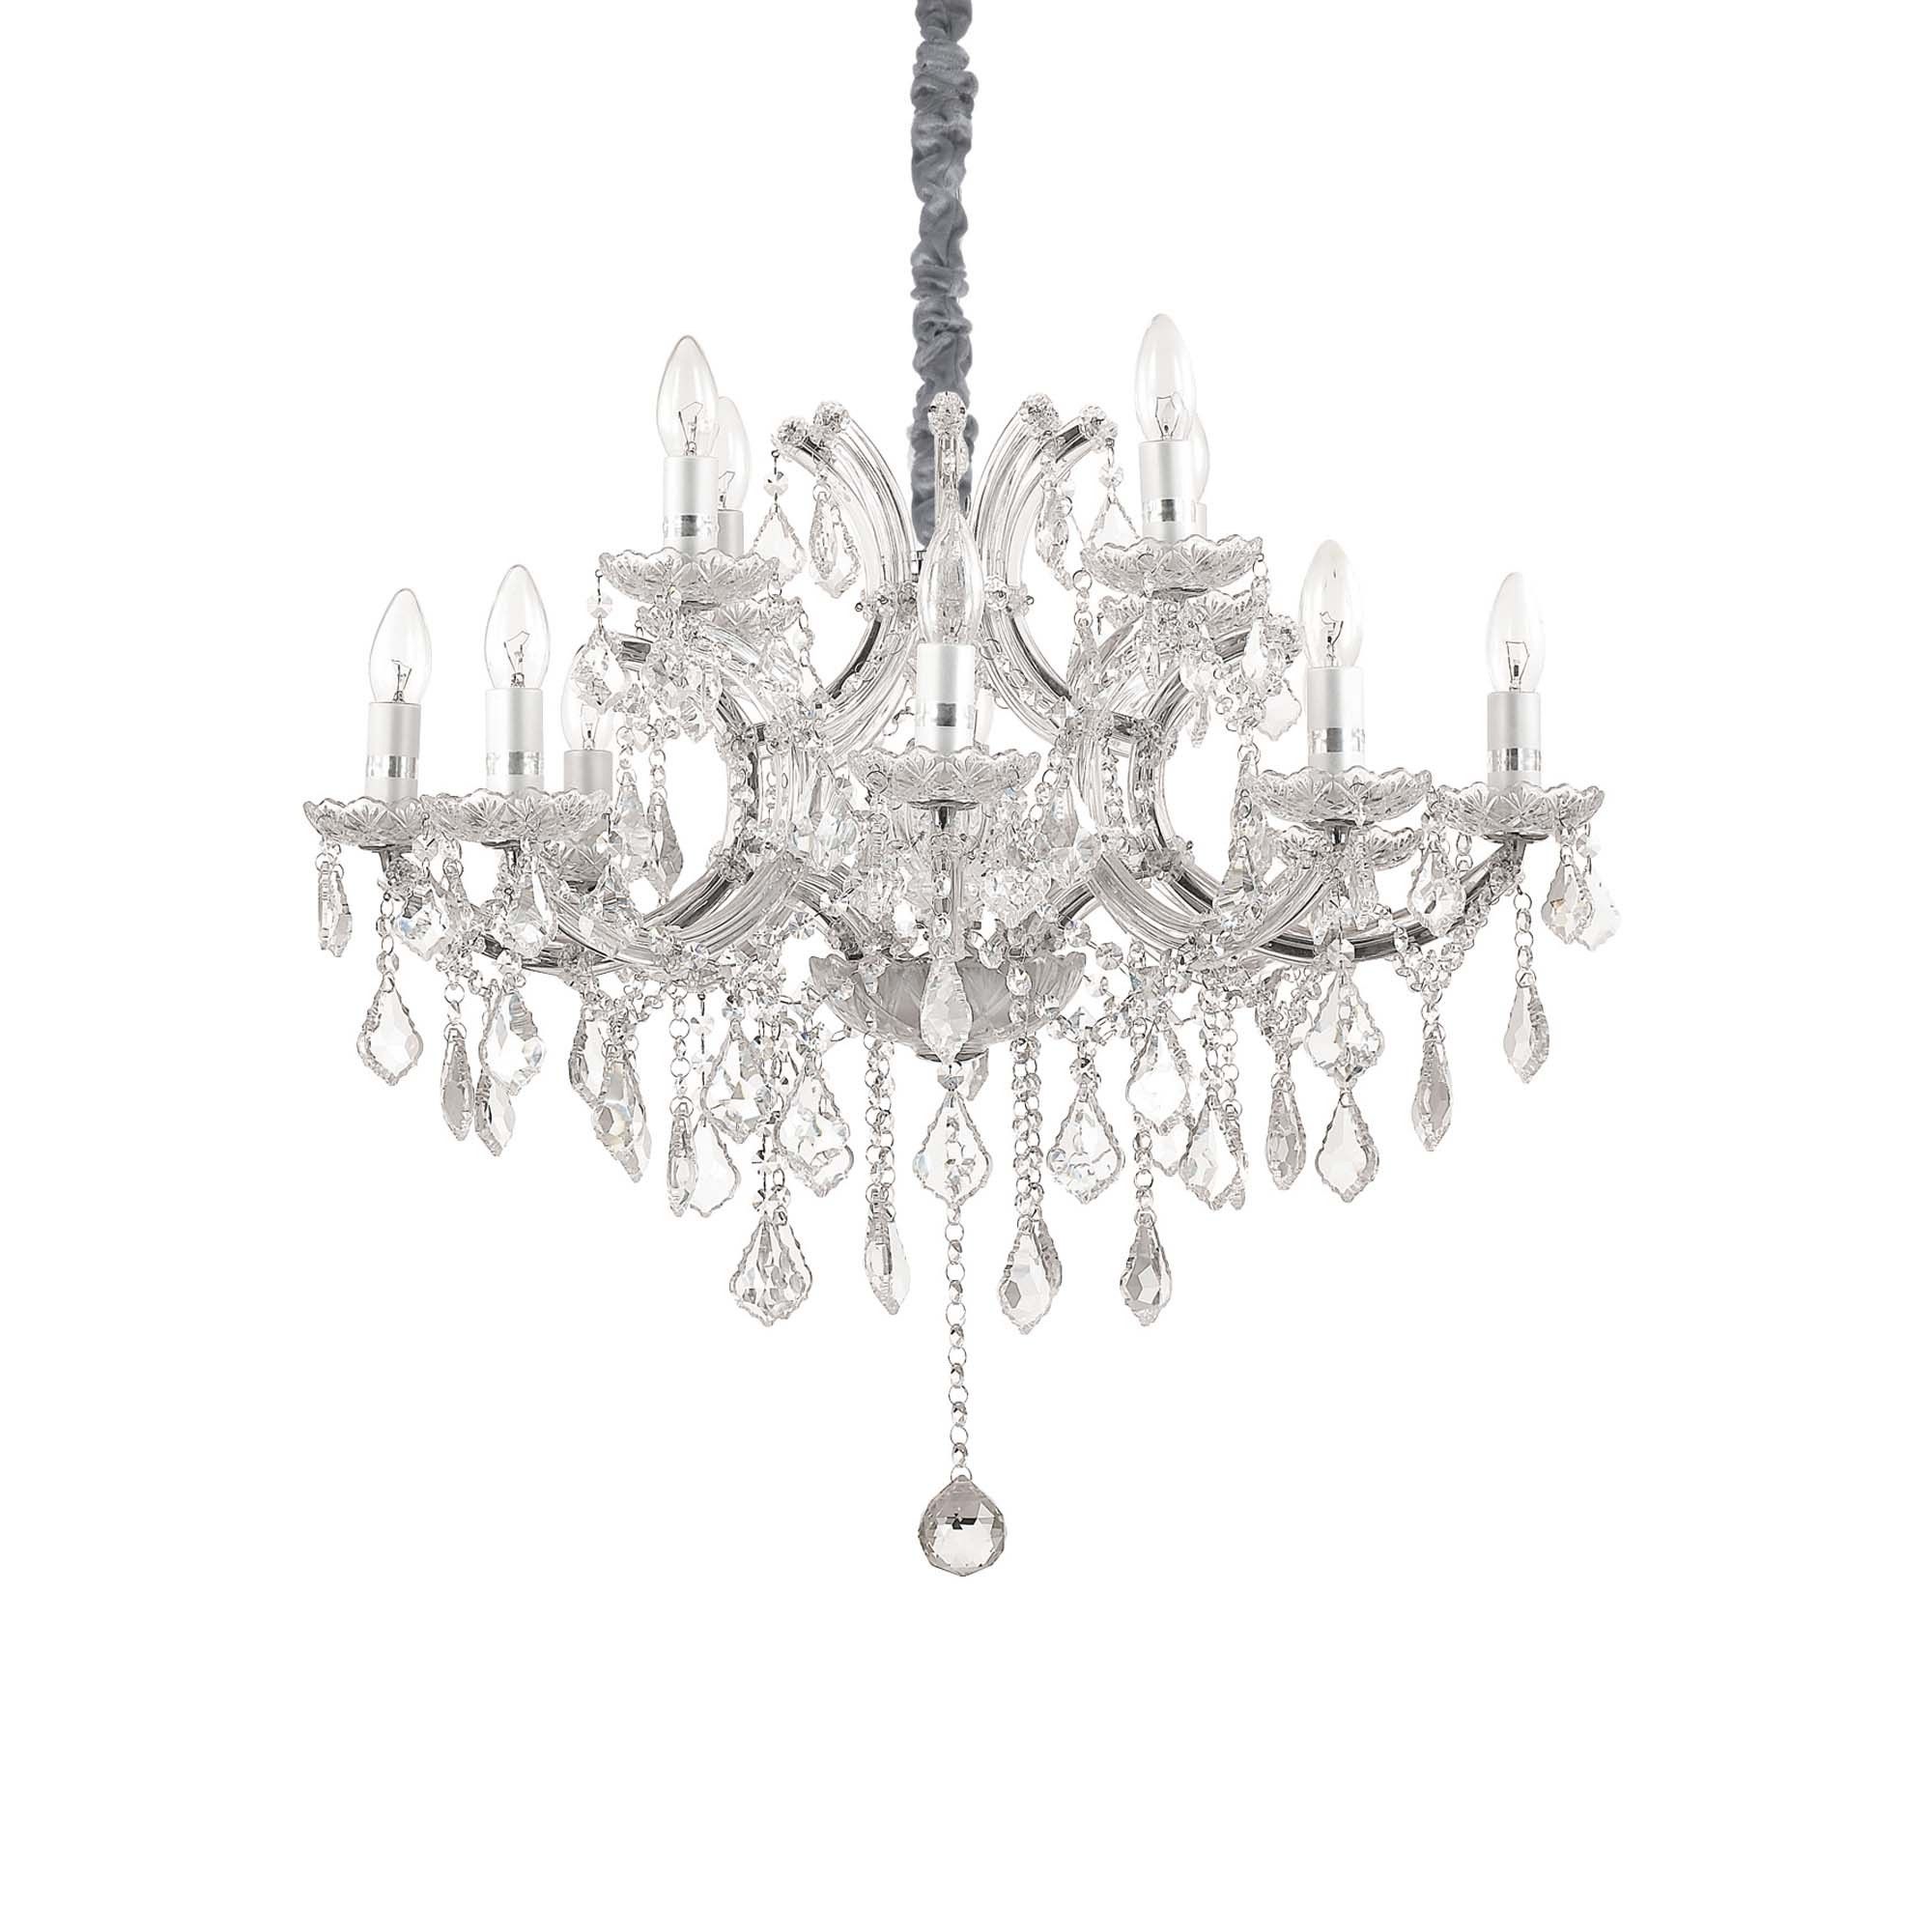 Transparent Glass Chandeliers Pertaining To 2020 Classic Transparent Crystal Chandelier Dl (View 1 of 15)